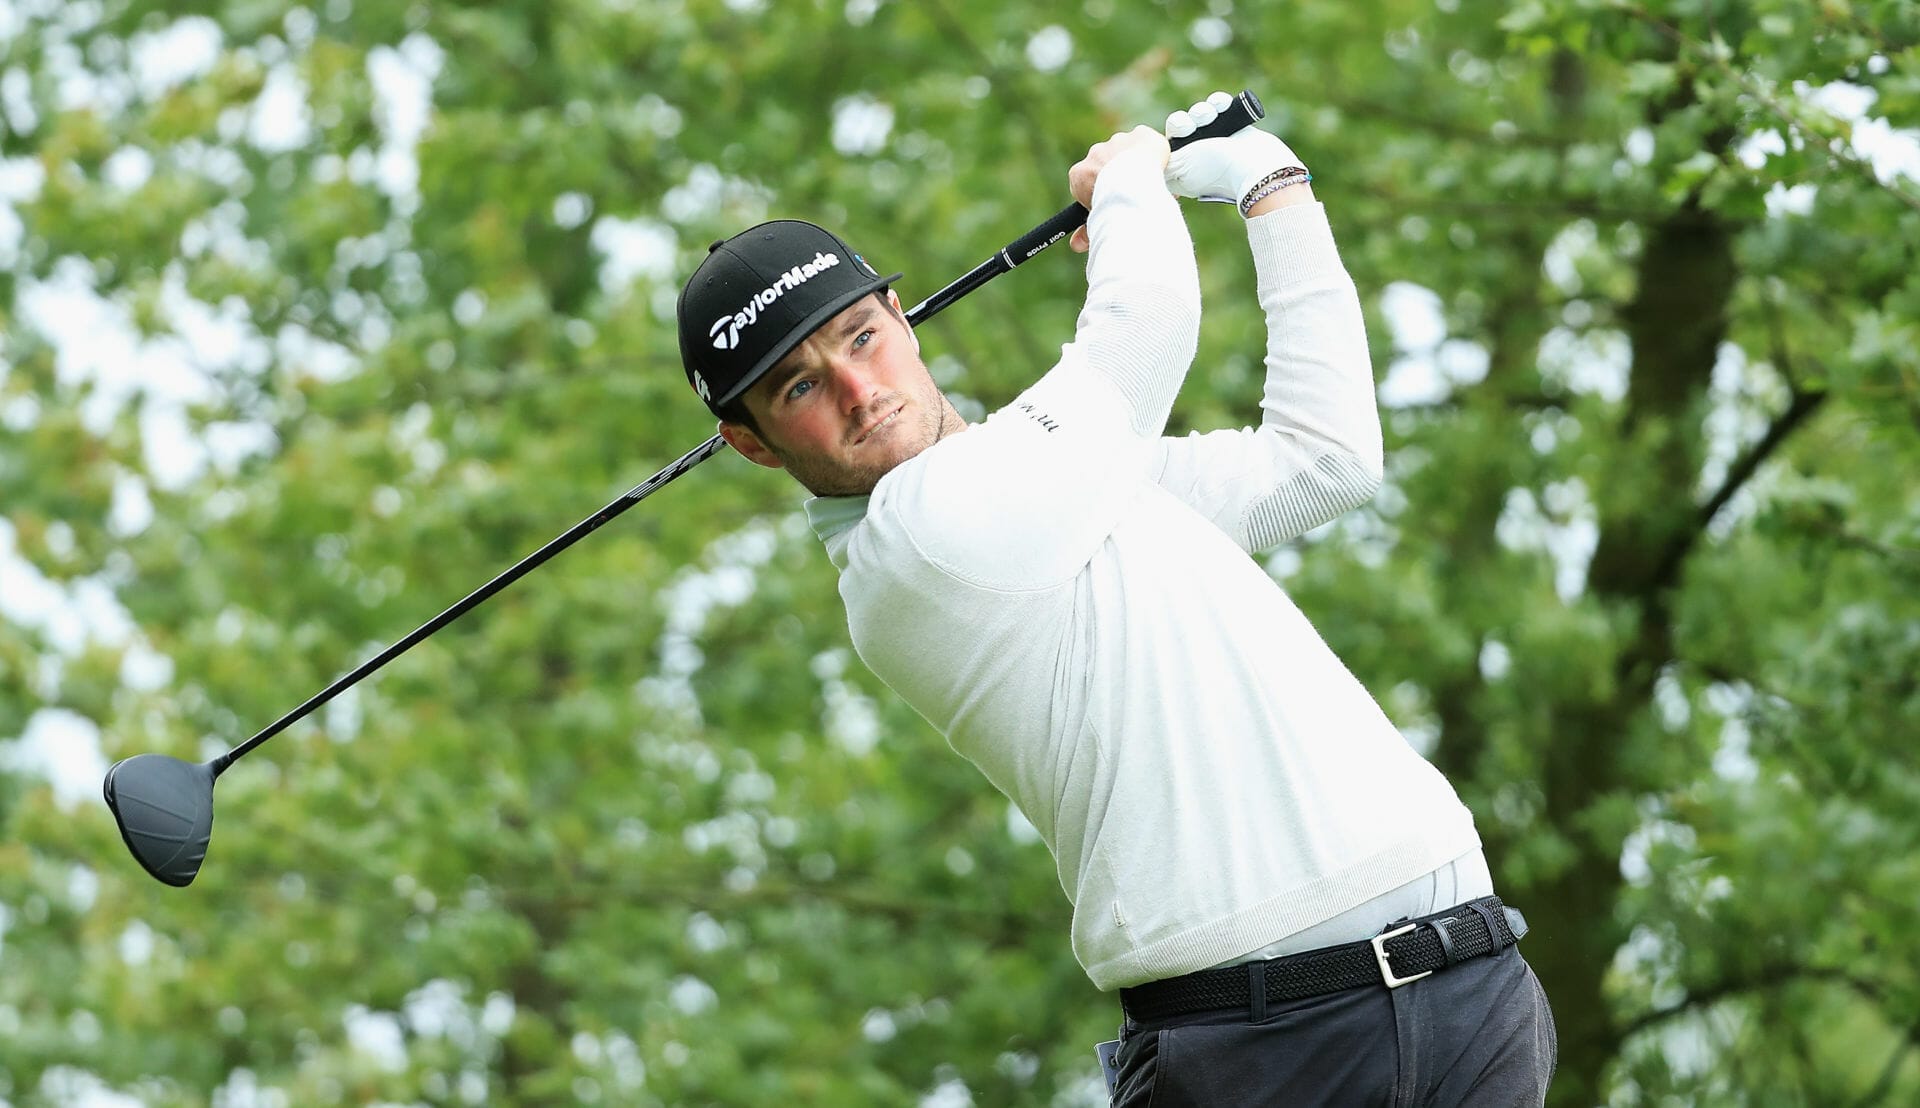 McGee and Sharvin advance at Le Vaudrieul Golf Challenge